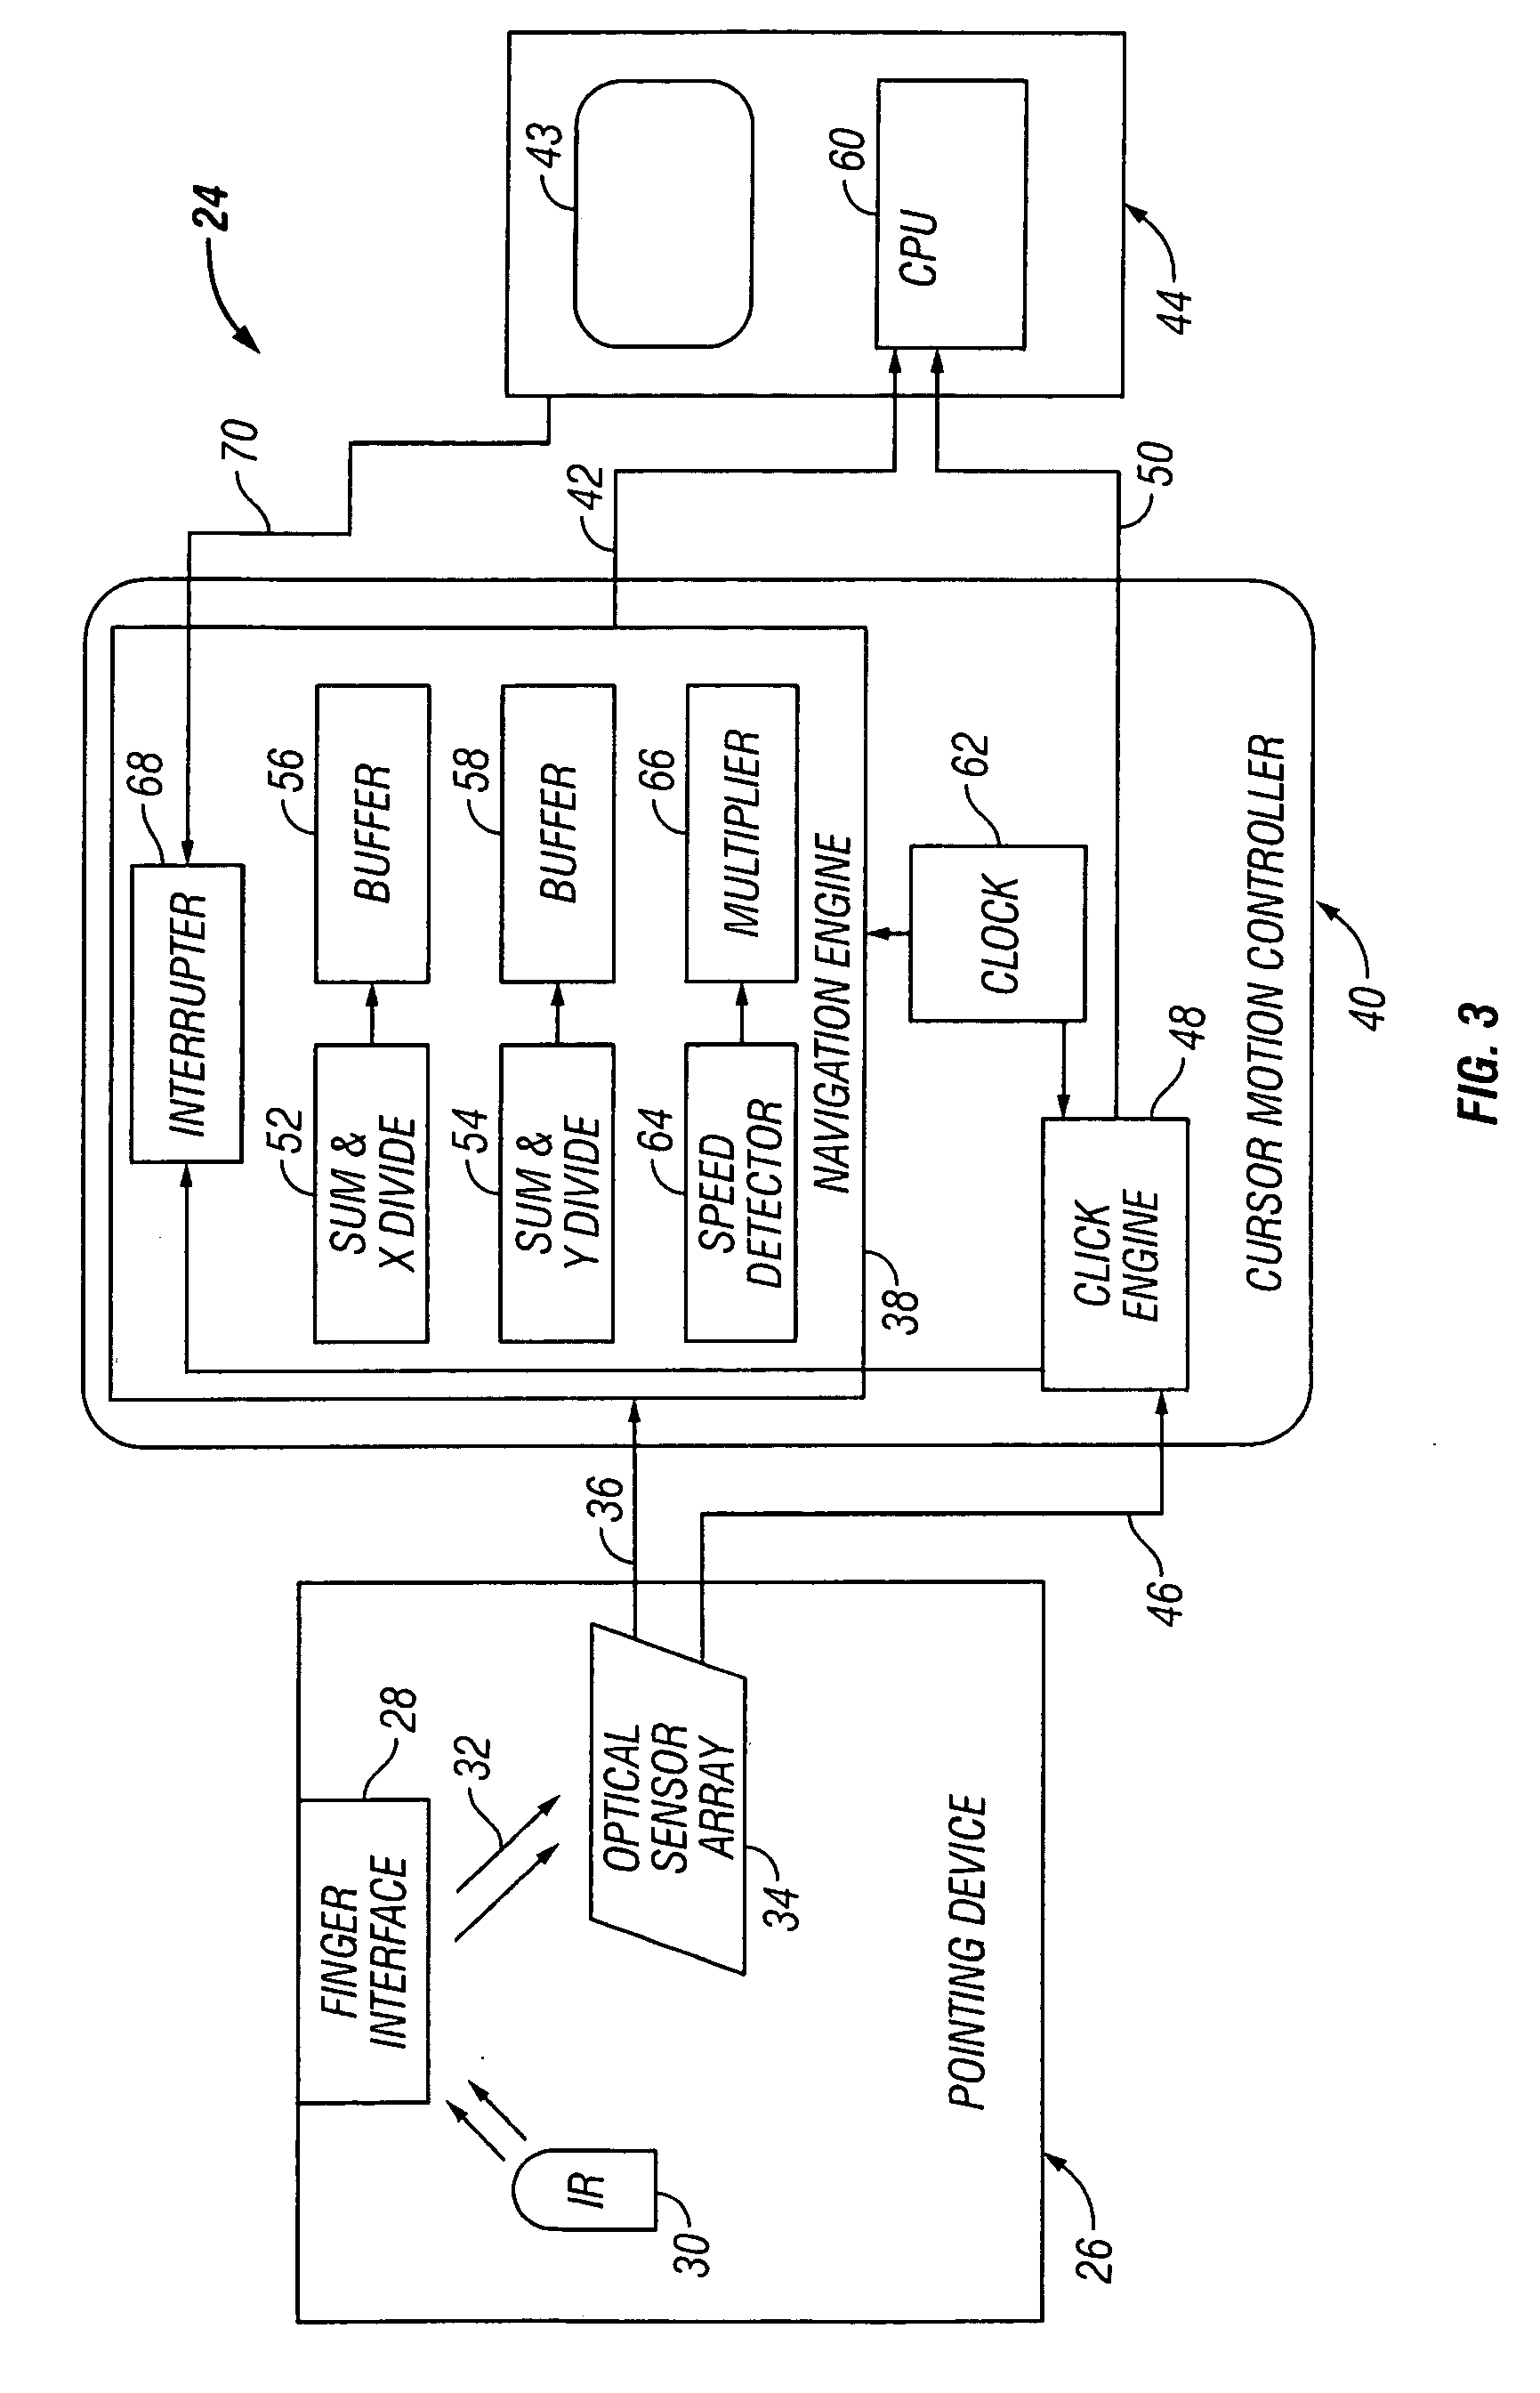 Cursor motion control of a pointing device